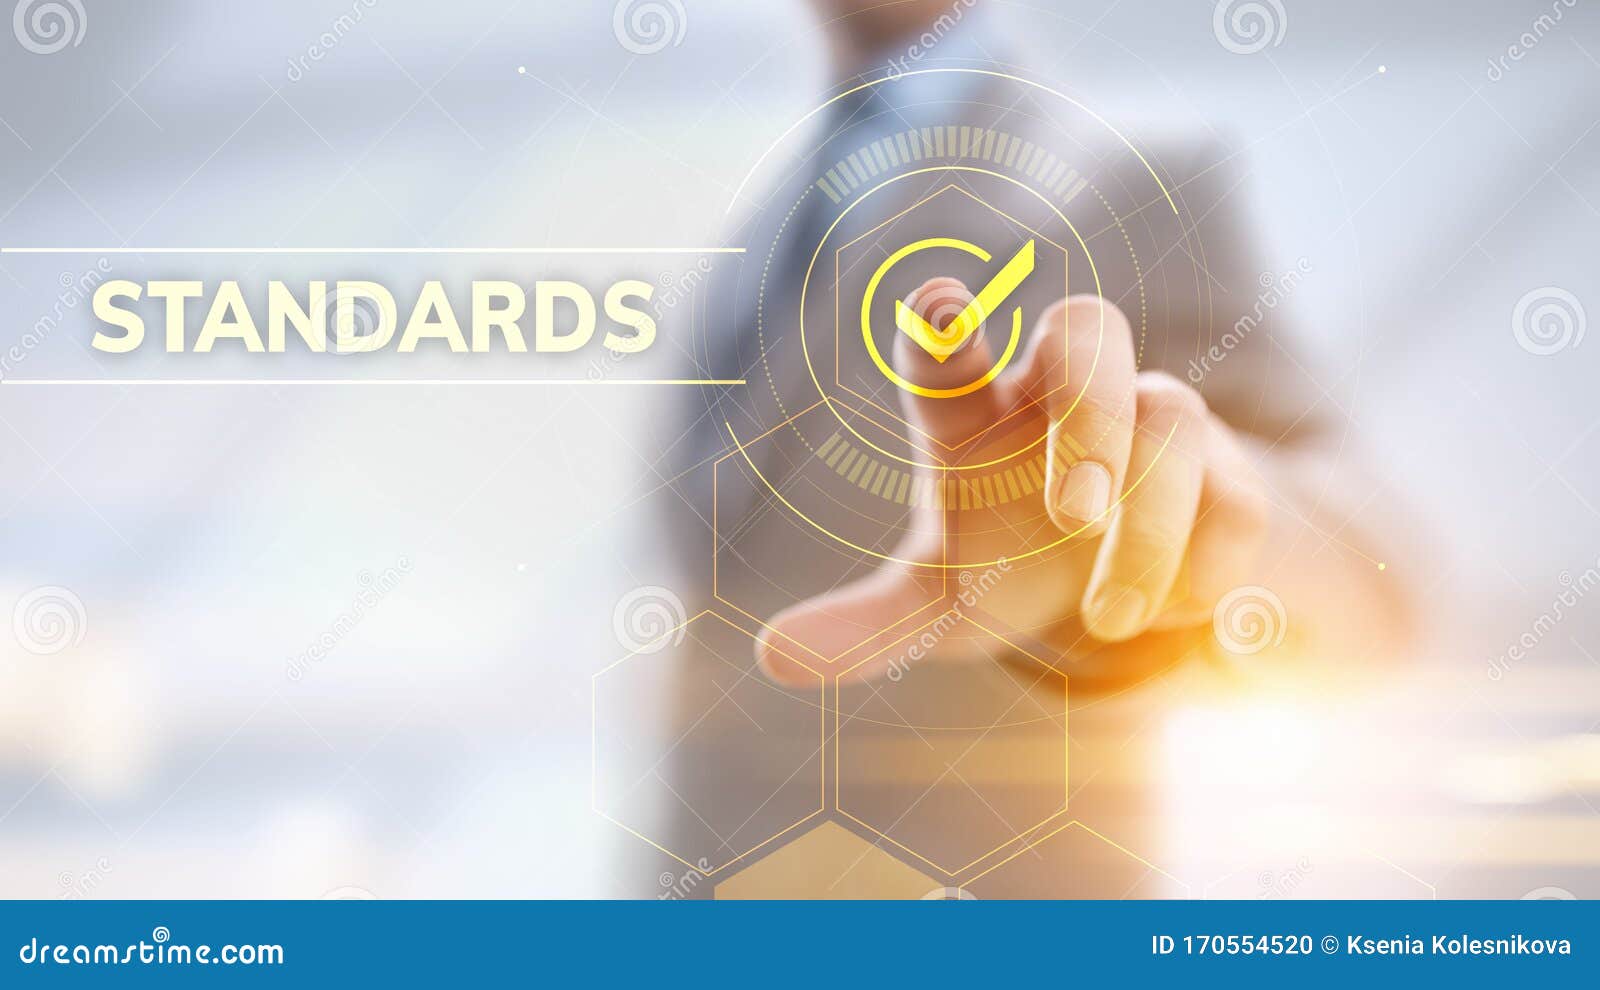 standards quality assurance control standardisation and certification concept.